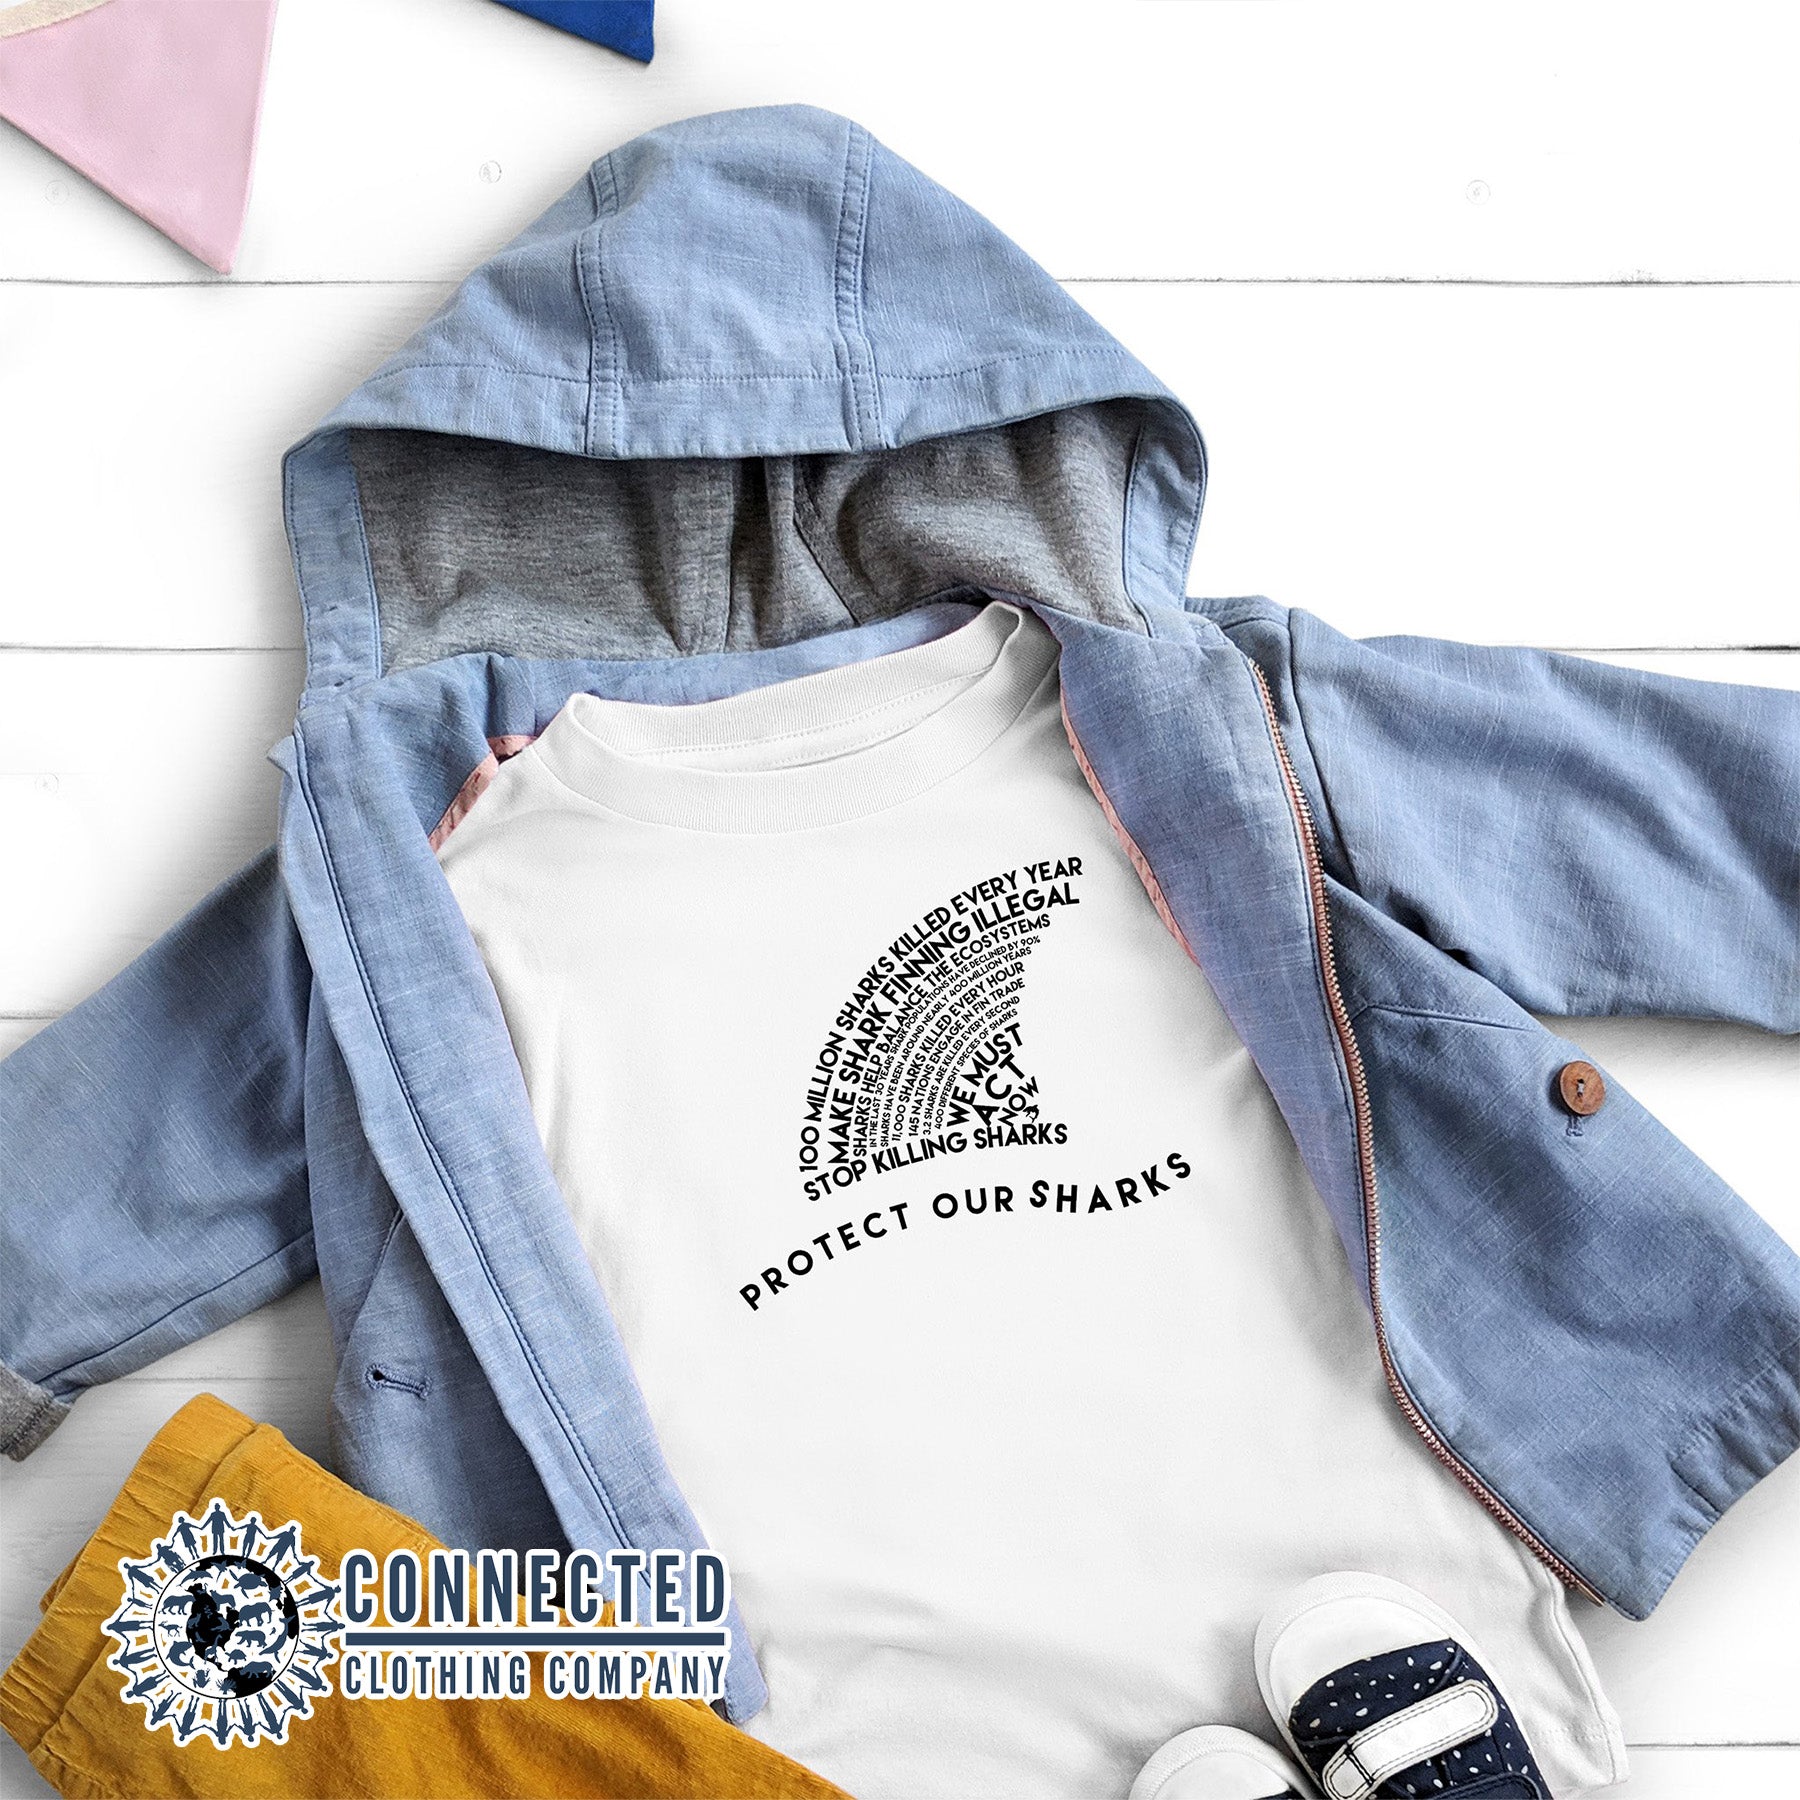 White Protect Our Sharks Toddler Short-Sleeve Tee - sweetsherriloudesigns - 10% of profits donated to Oceana shark conservation